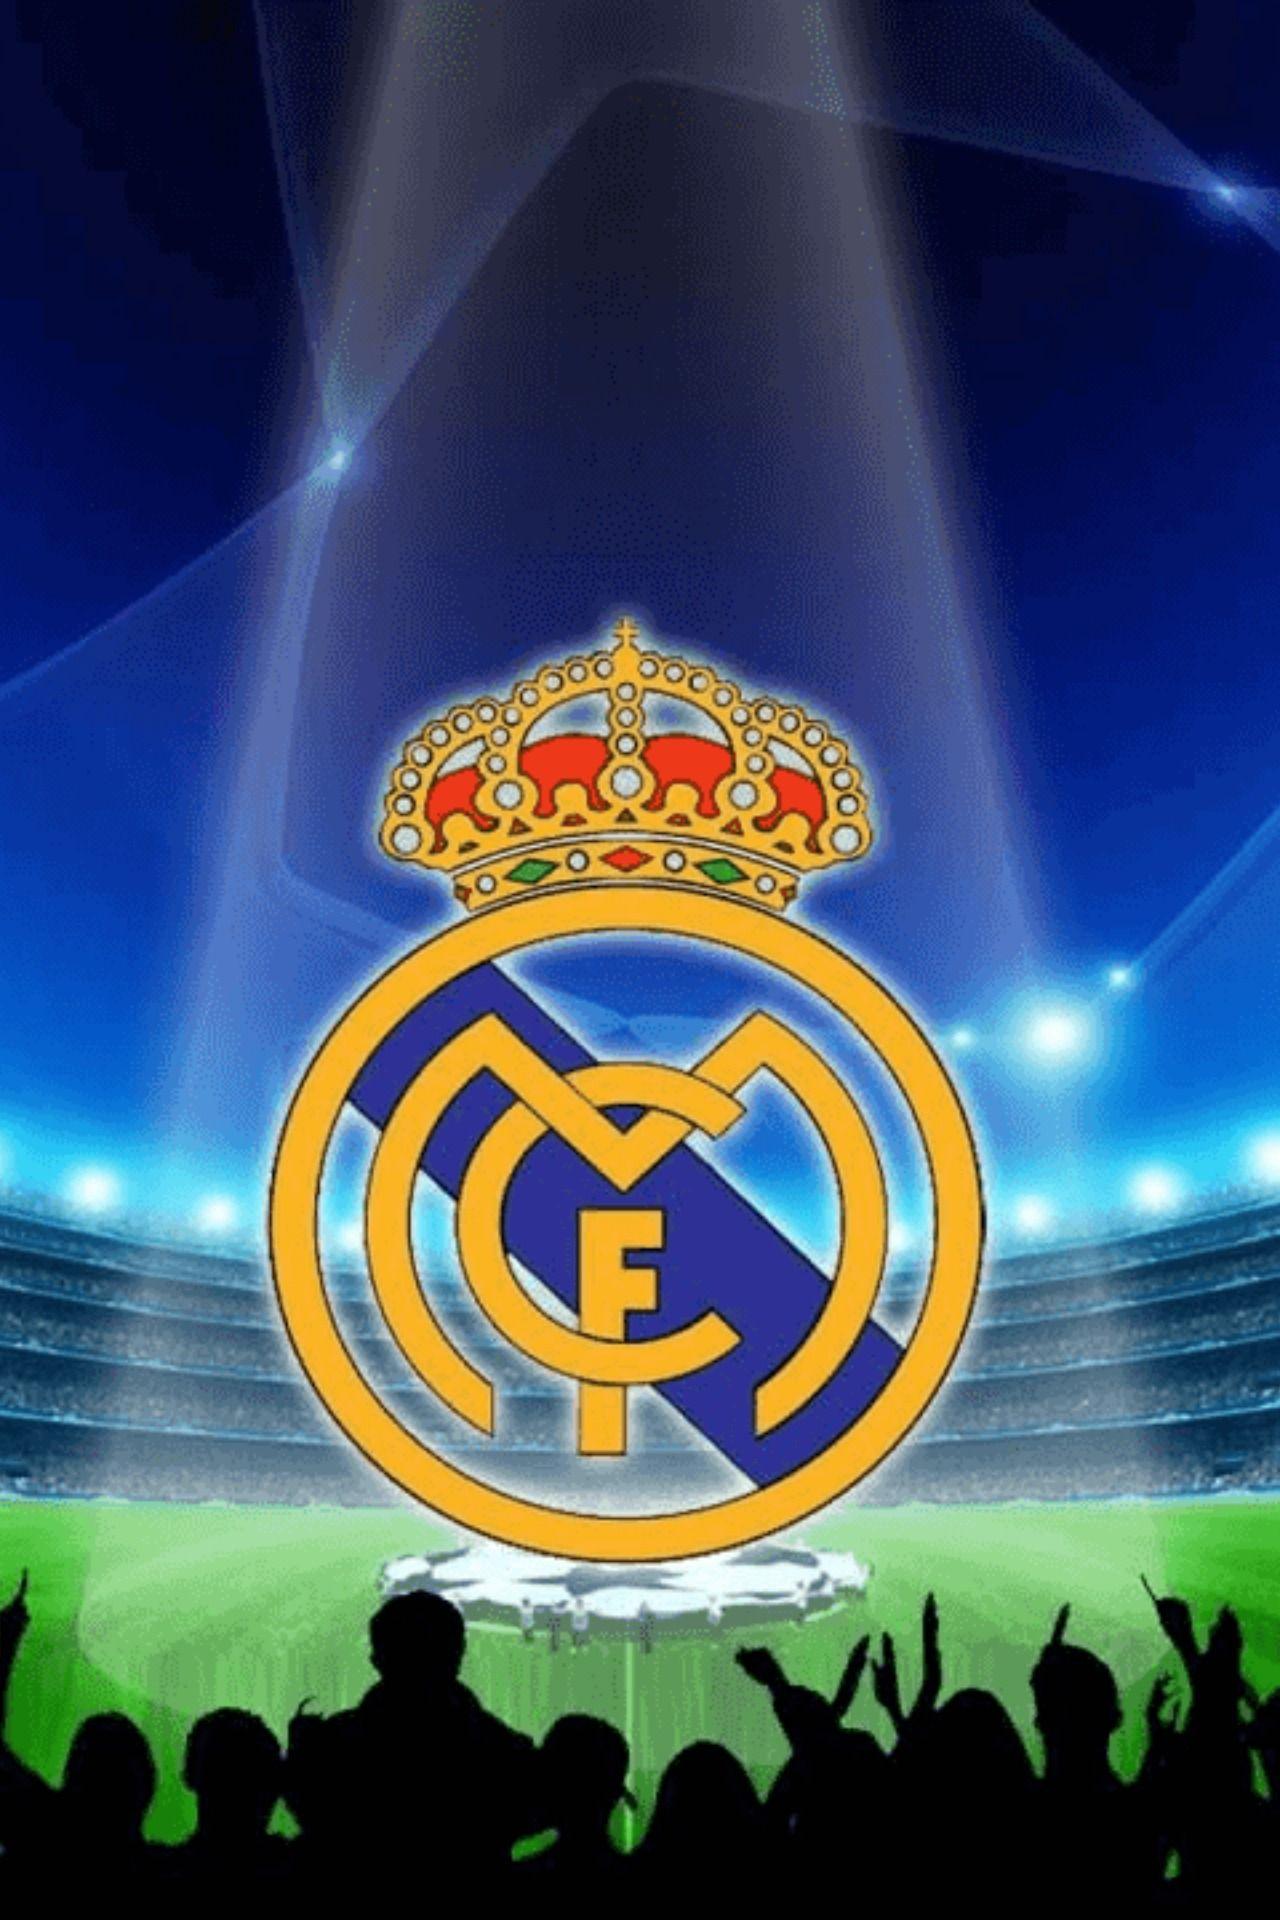 Wallpaper Real Madrid Galaxi Hd Android 3d | zflas